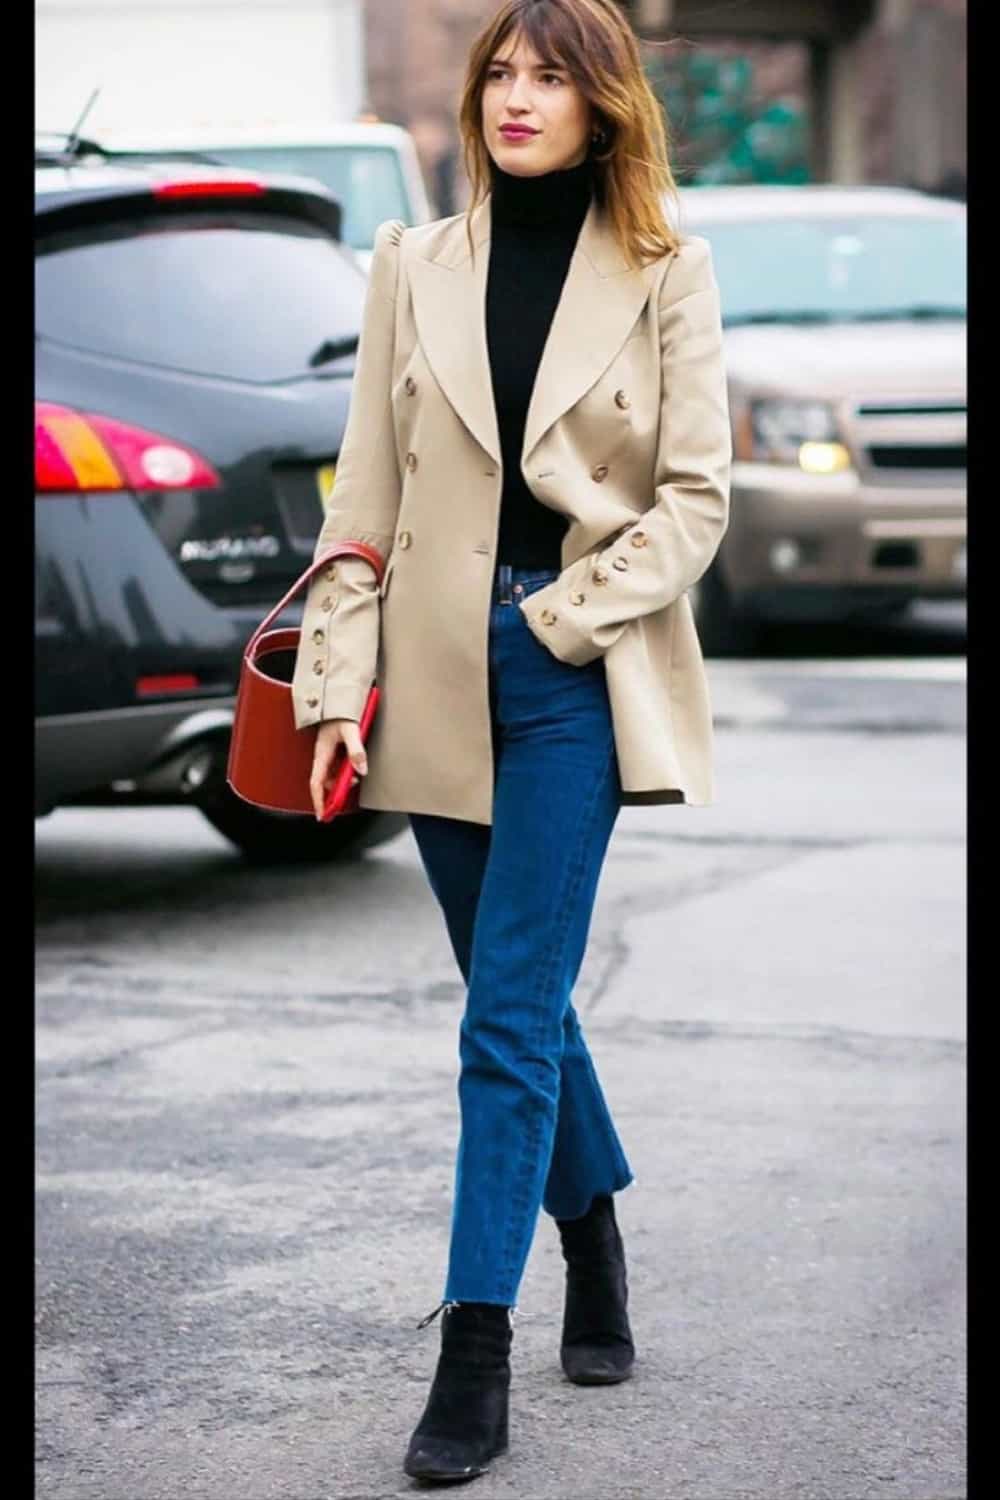 Black Turtleneck Sweater Outfit with blue jeans